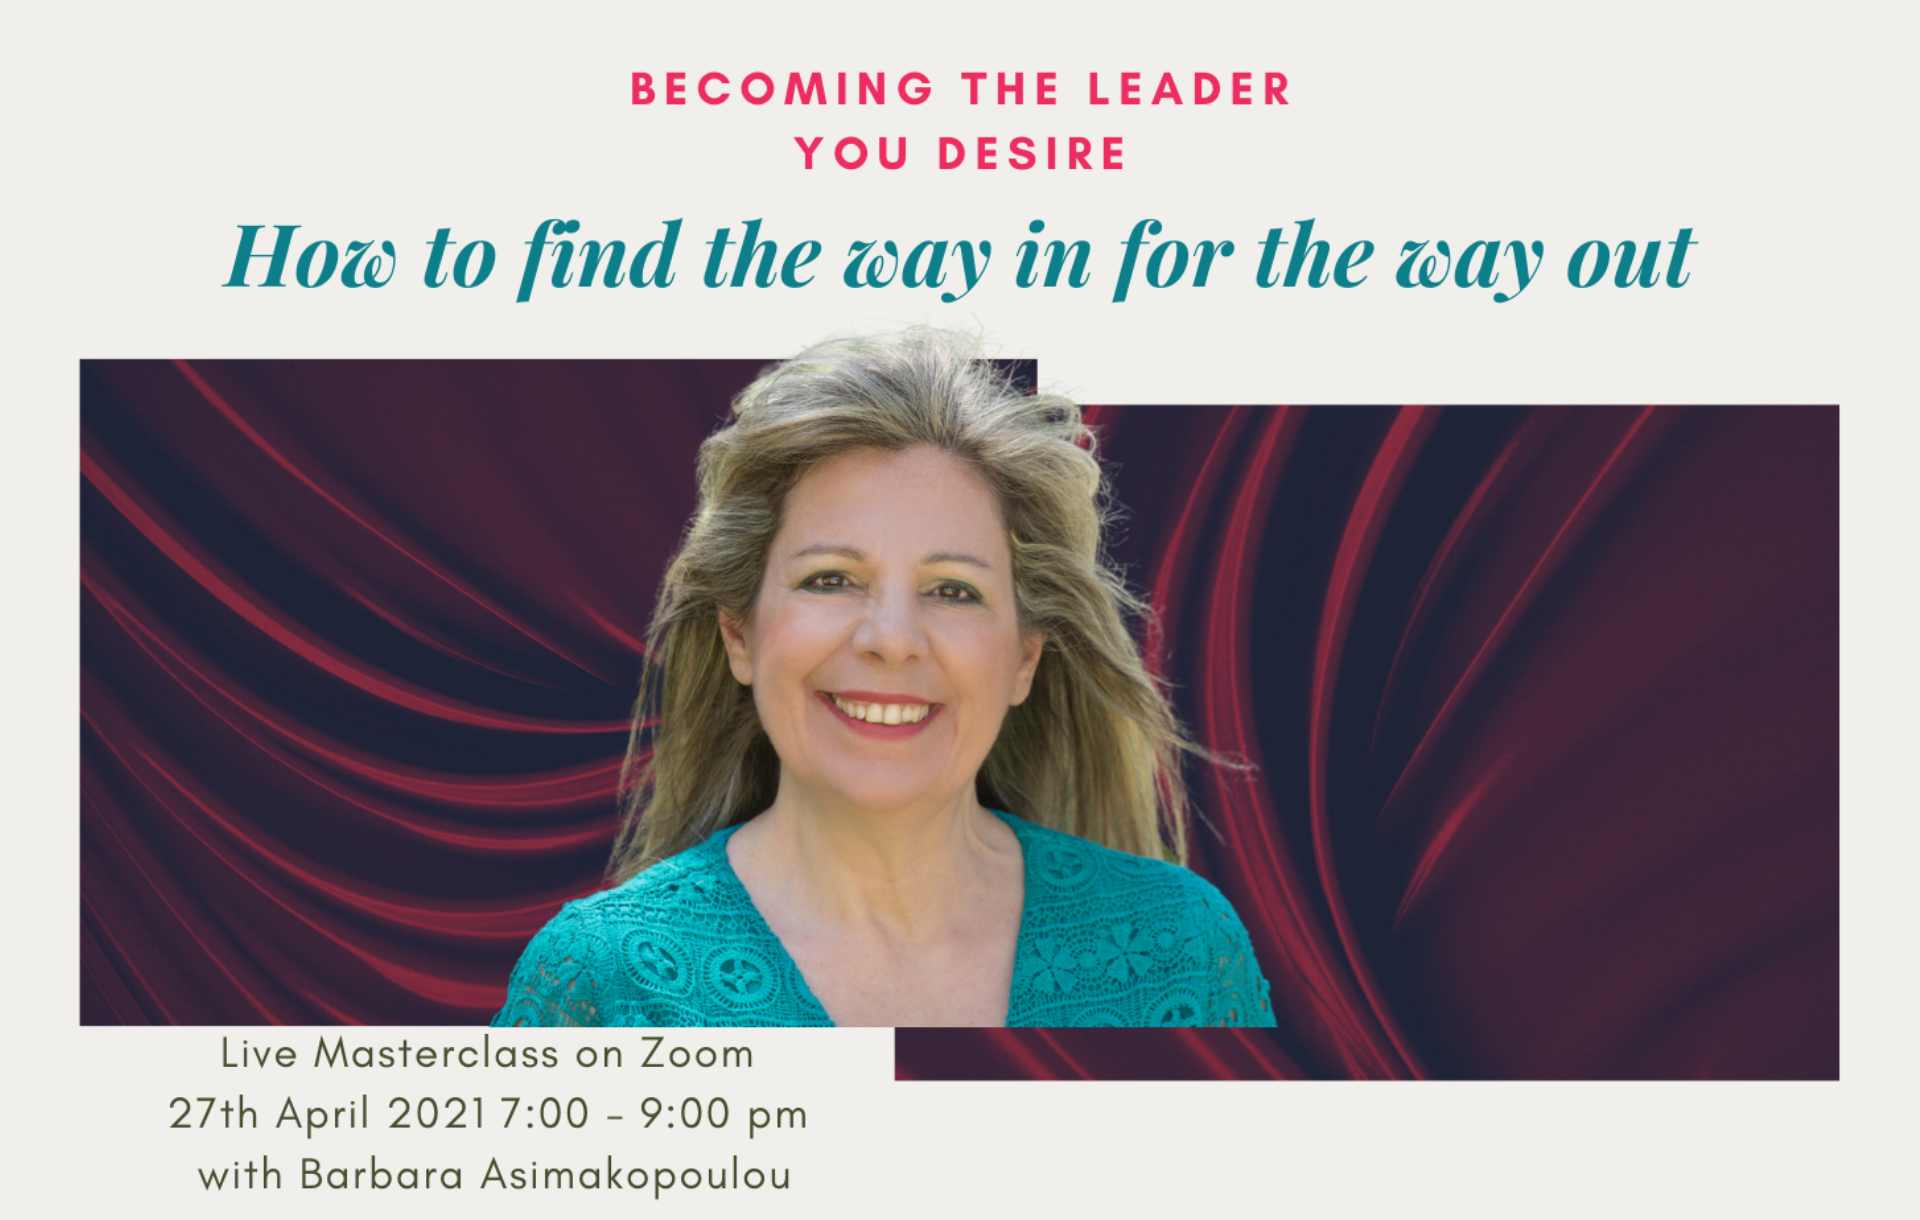 How to find the Way In for the Way Out - Becoming the Leader you desire